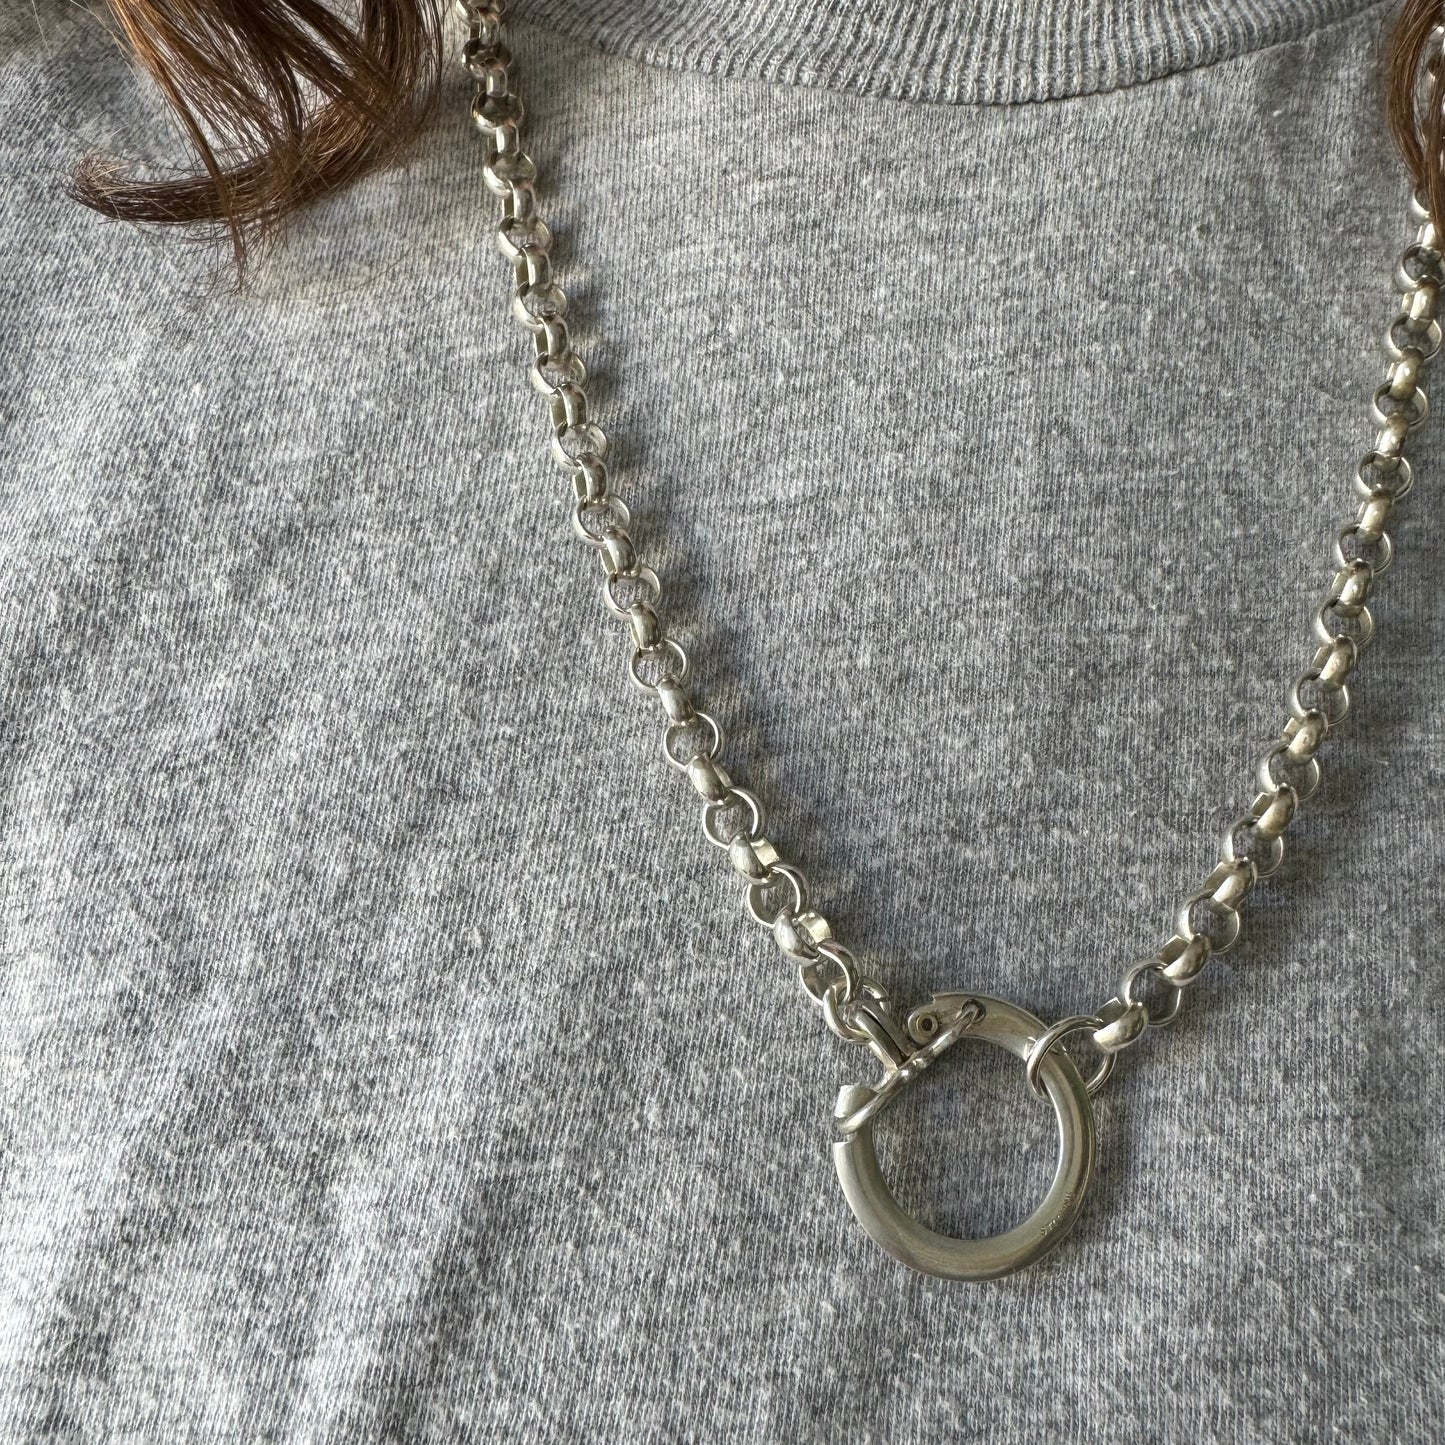 reimagined V I N T A G E // connected possibilities / sterling silver rolo chain with connector clasp / 21.75", 35g